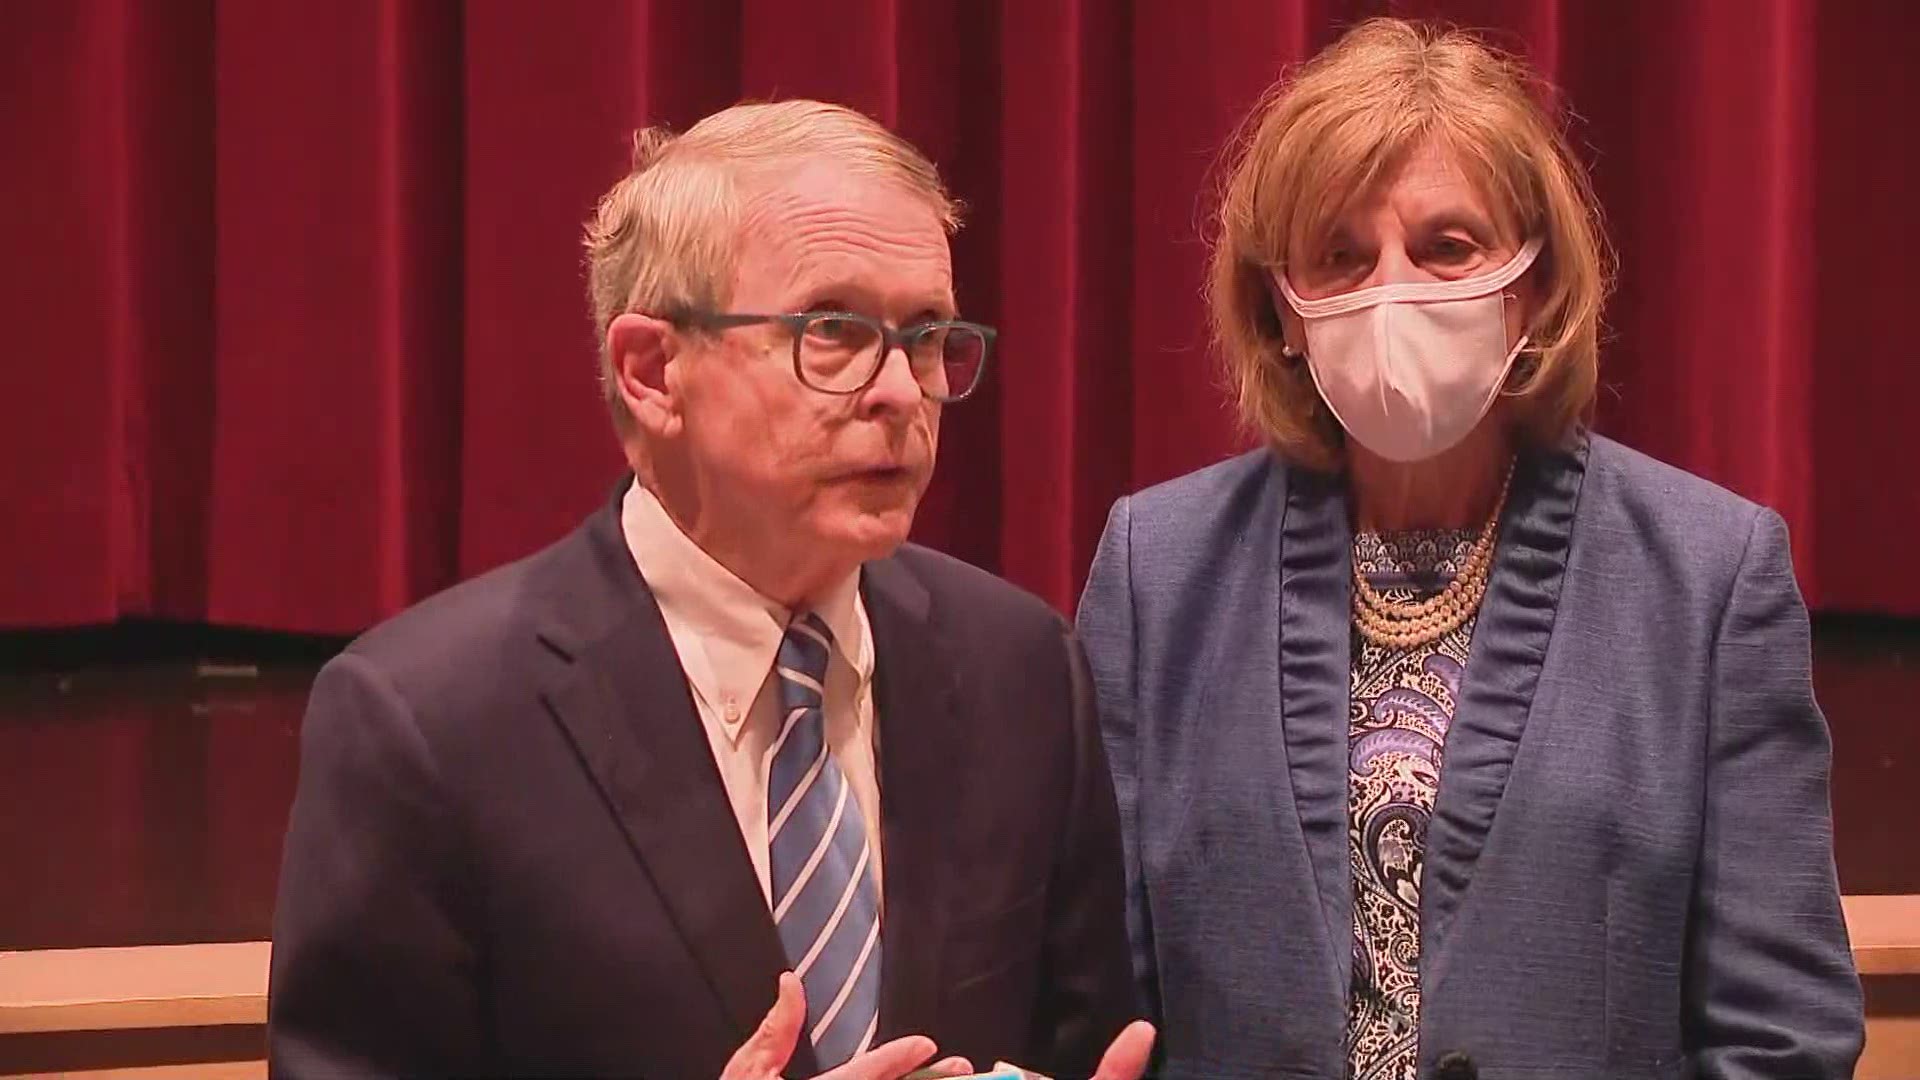 DeWine urged people to get vaccinated during a visit to Circleville High School.